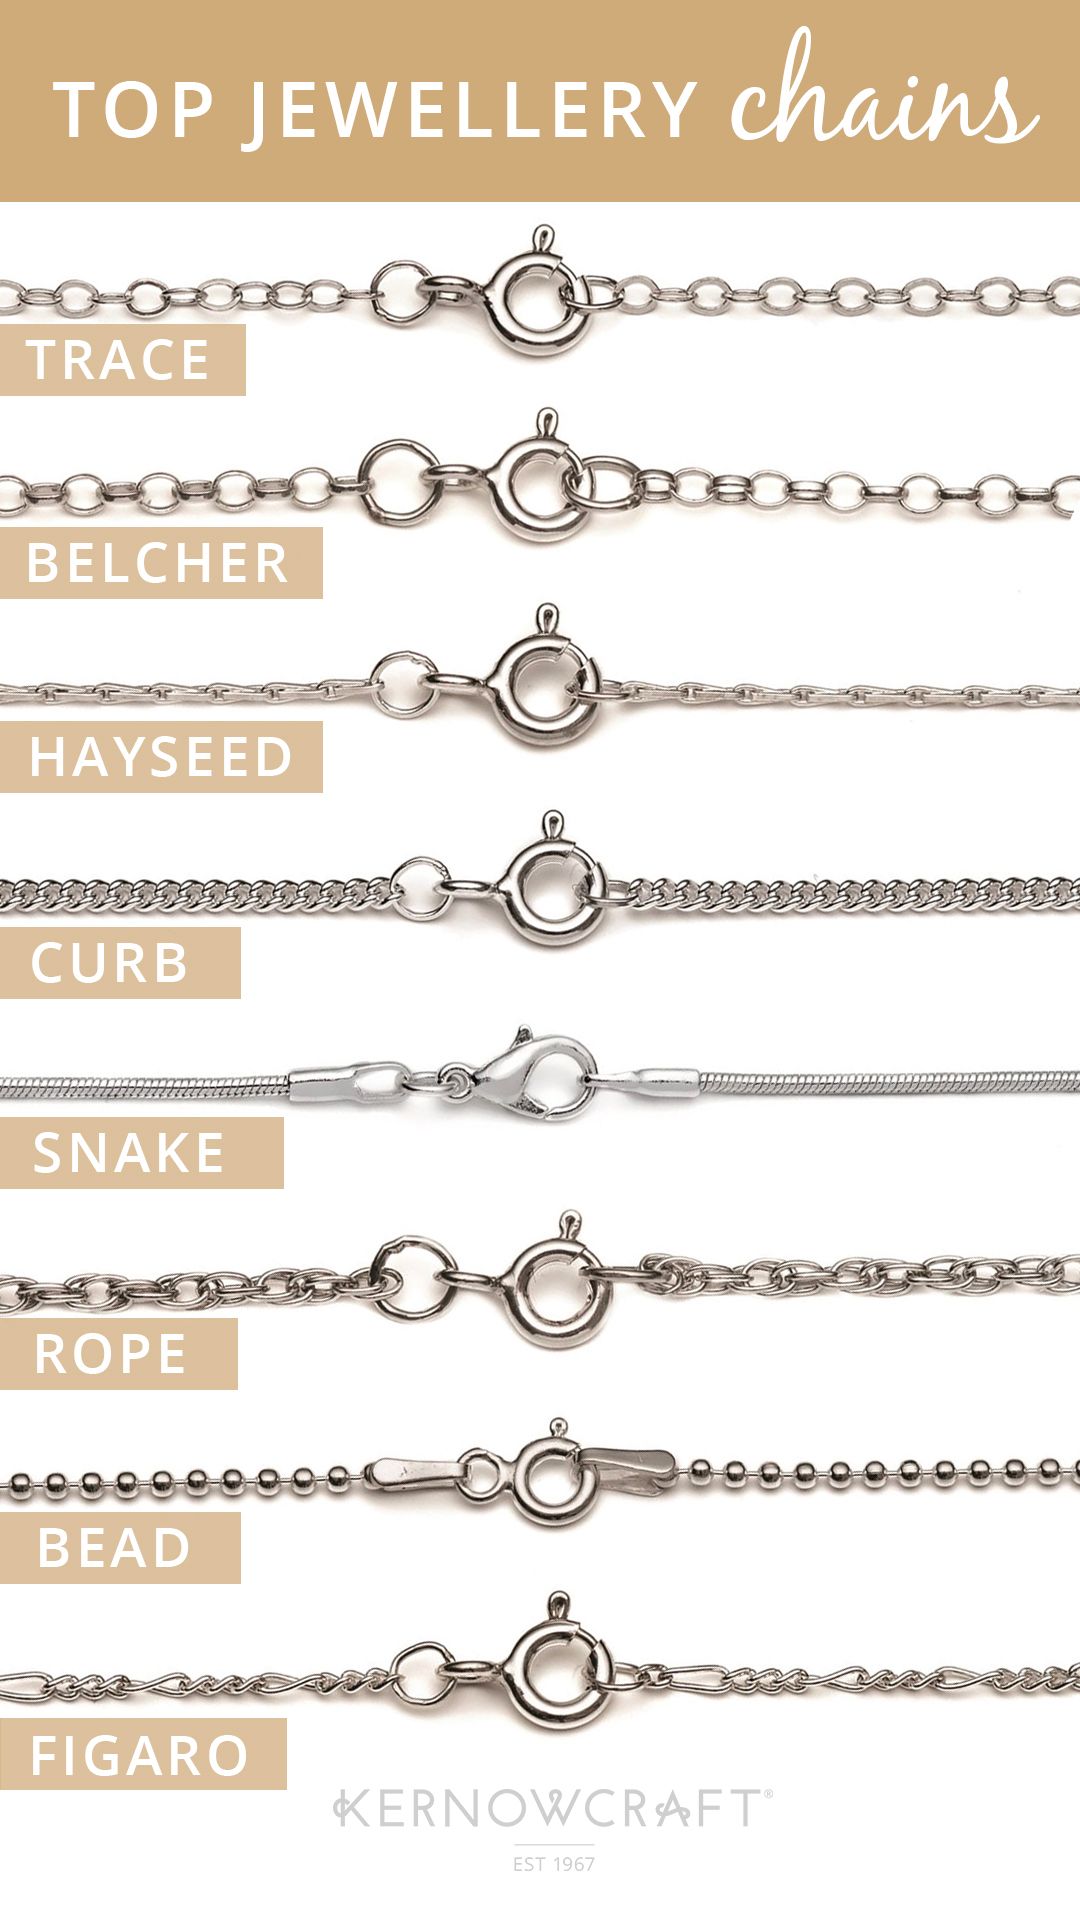 Types of Chains For Jewelry Making - CloudCompare forum